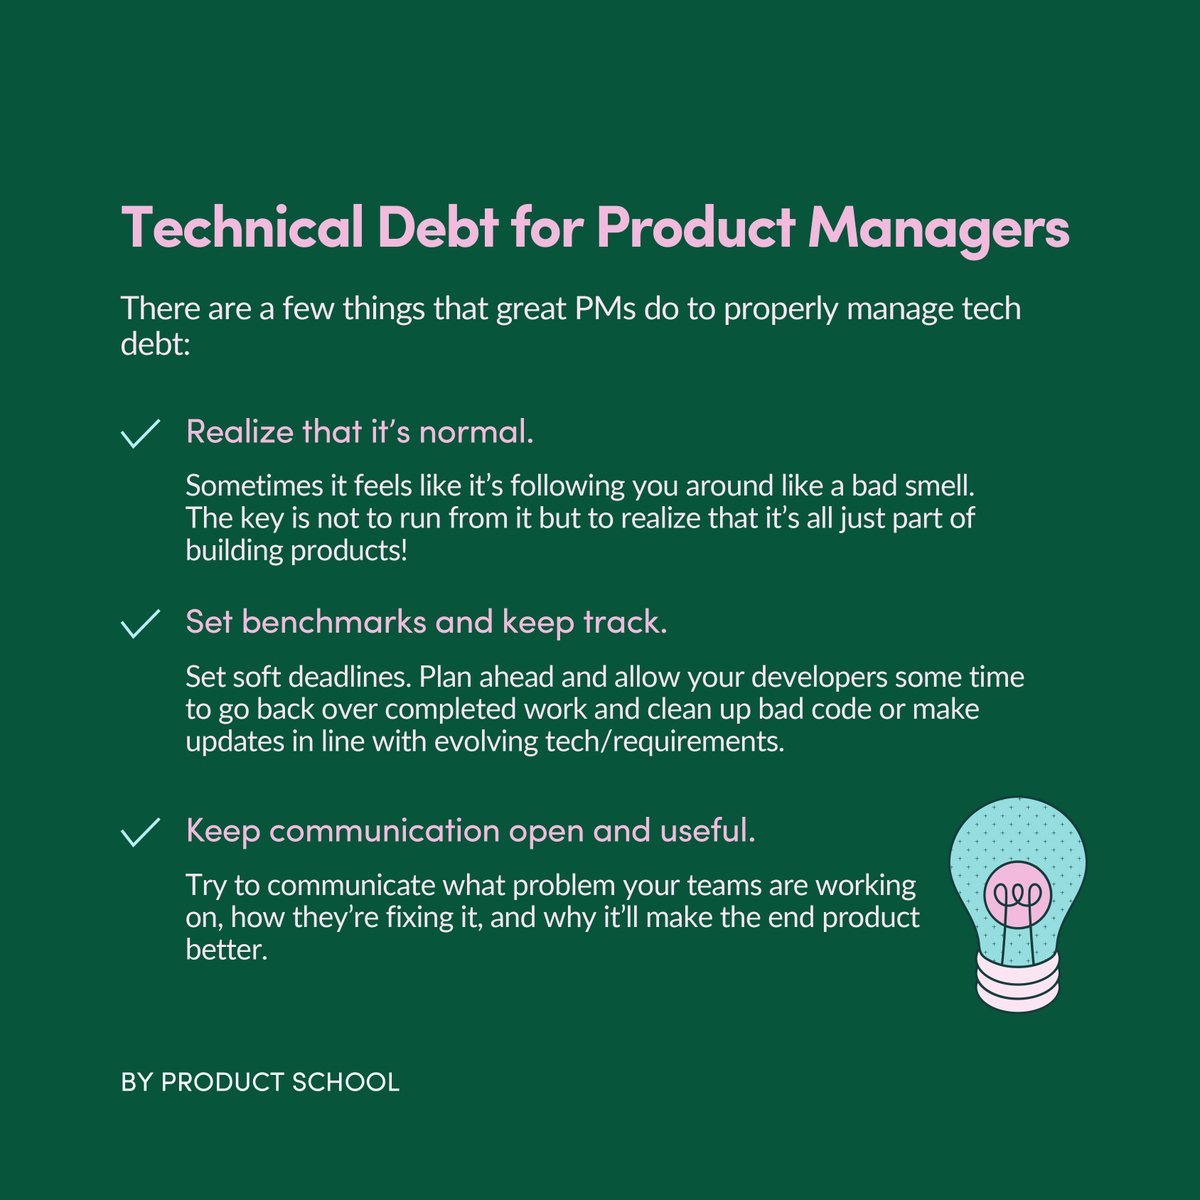 Technical debt (tech debt, code debt, or design debt) is when code quality is sacrificed in exchange for a speedier delivery. 🔧 

Take a look at the types of tech debt and how to manage them as a Product Manager:  prdct.school/3NHcOux

#productmanagement #technicaldebt